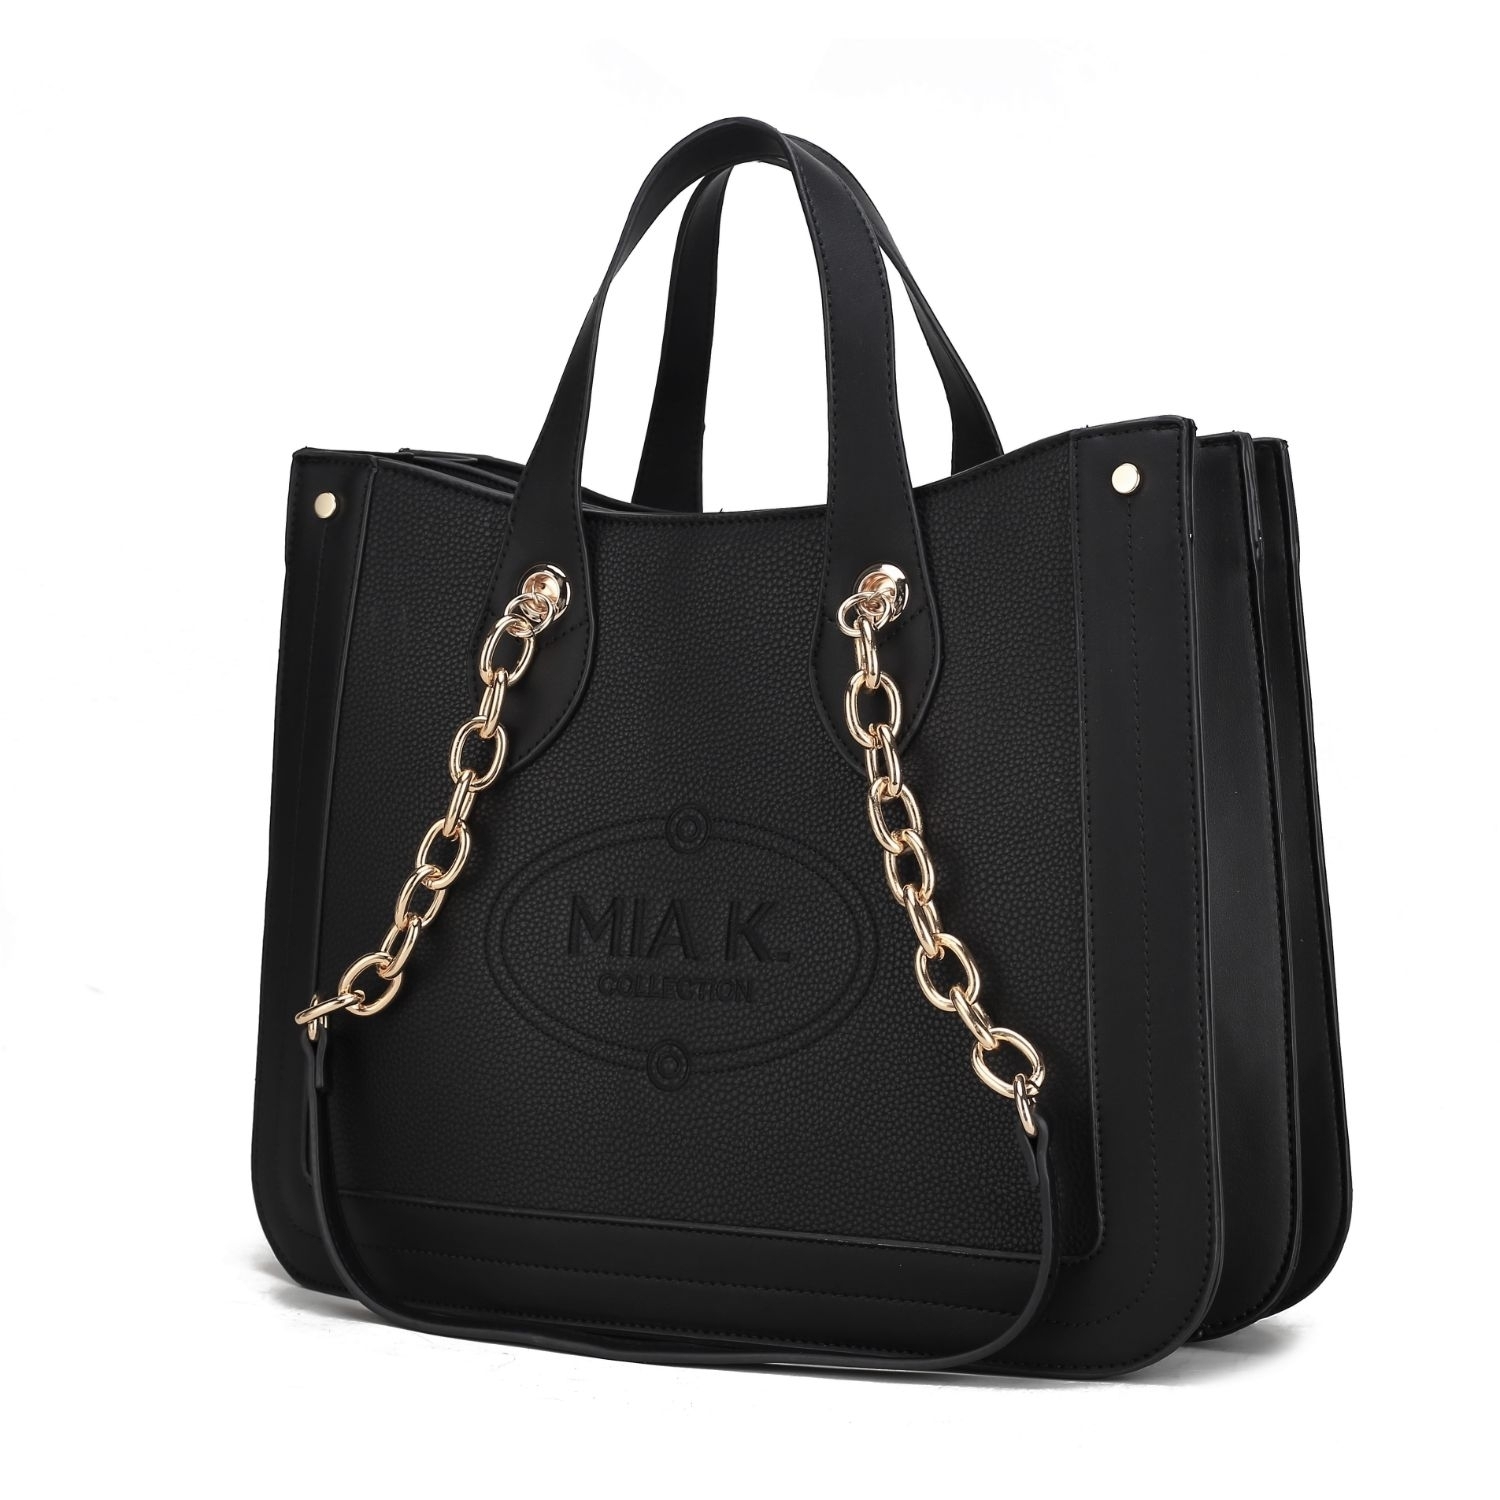 MKF Collection Stella Vegan Leather Women's Handbag Double Compartment Oversize Classy Tote By Mia K. - Pewter